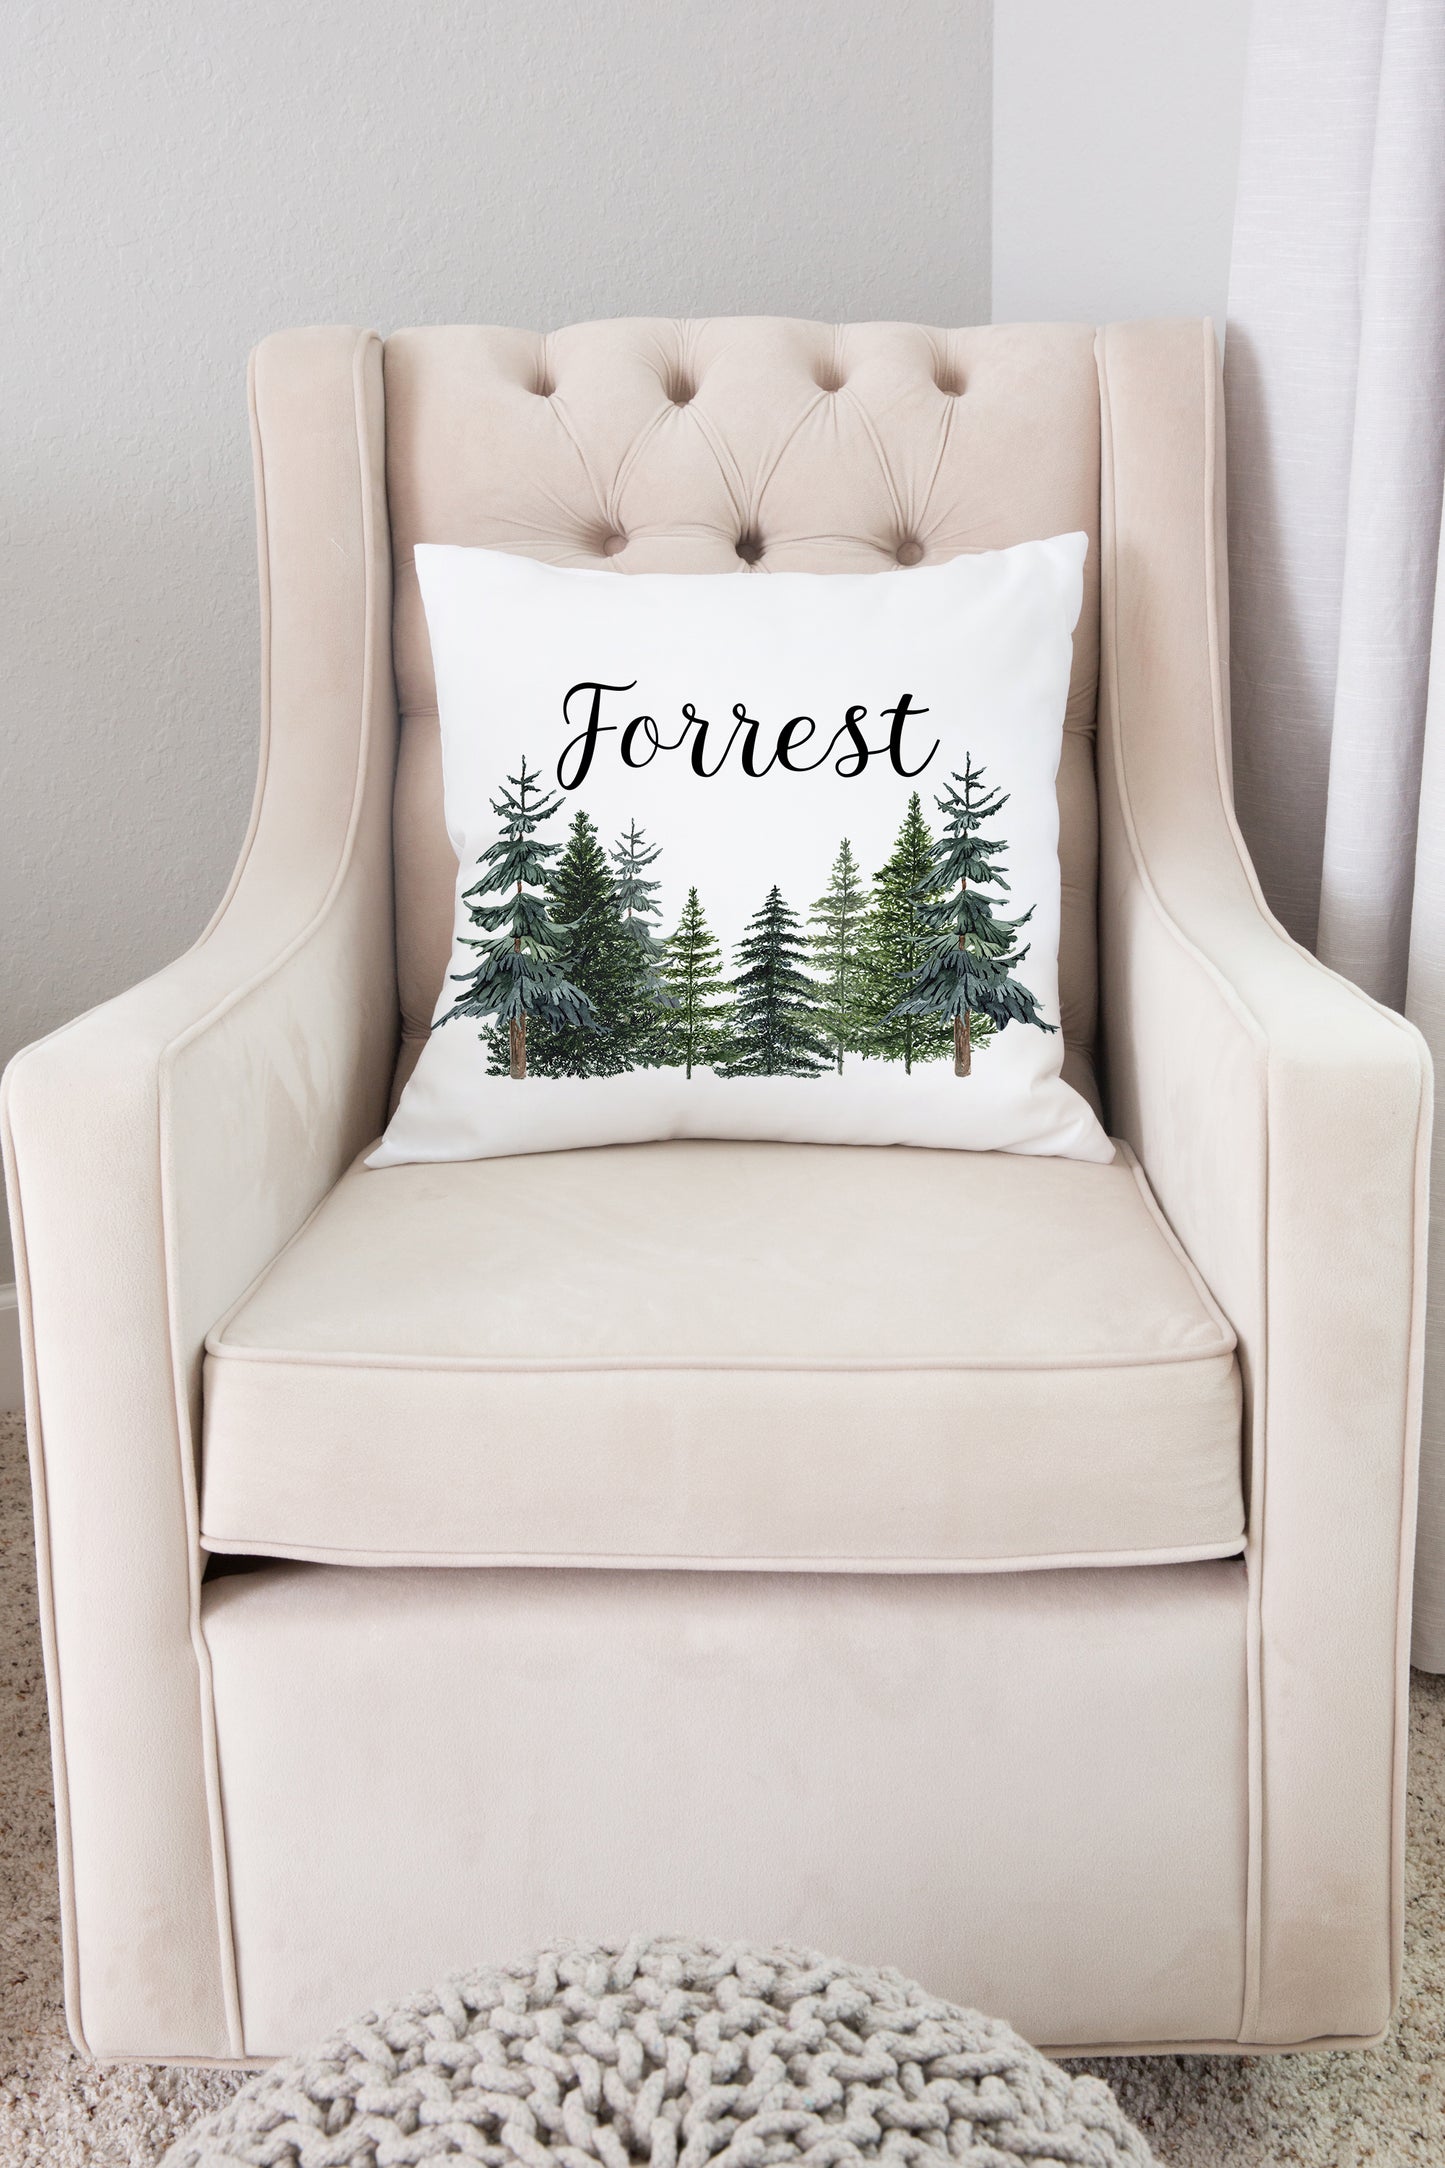 Pine Trees Personalized Pillow, Woodland Nursery Decor - The Forest